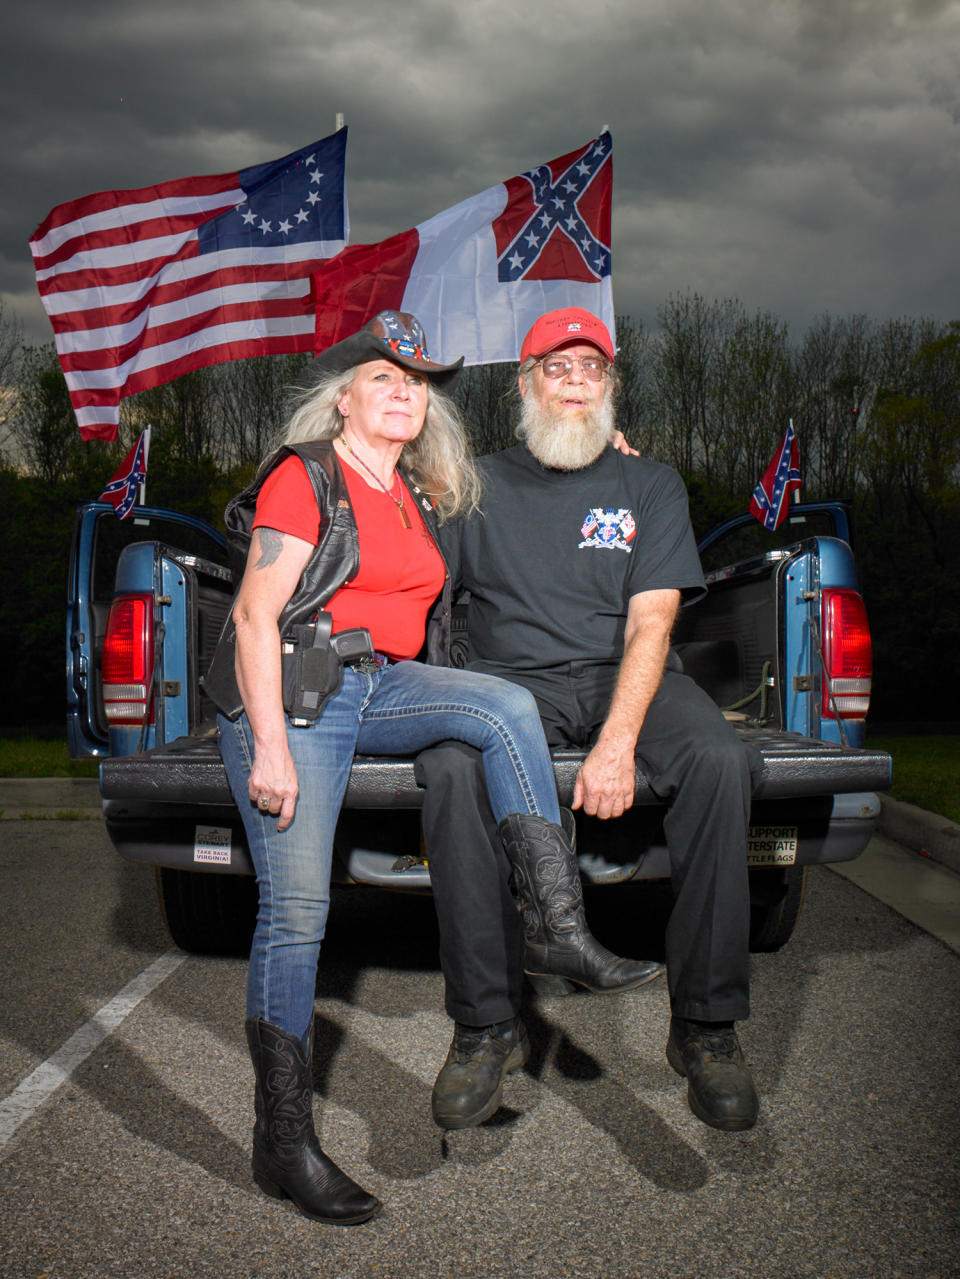 <p>“Wayne Byrd, president of the Heritage Preservation Association, and his wife, Susan. The group gathers every Saturday outside the Danville Museum of Fine Arts and History to protest its removal of the Third National Flag of the Confederacy, a gift from the association. They voted for Trump.” (Photograph and caption by Naomi Harris) </p>